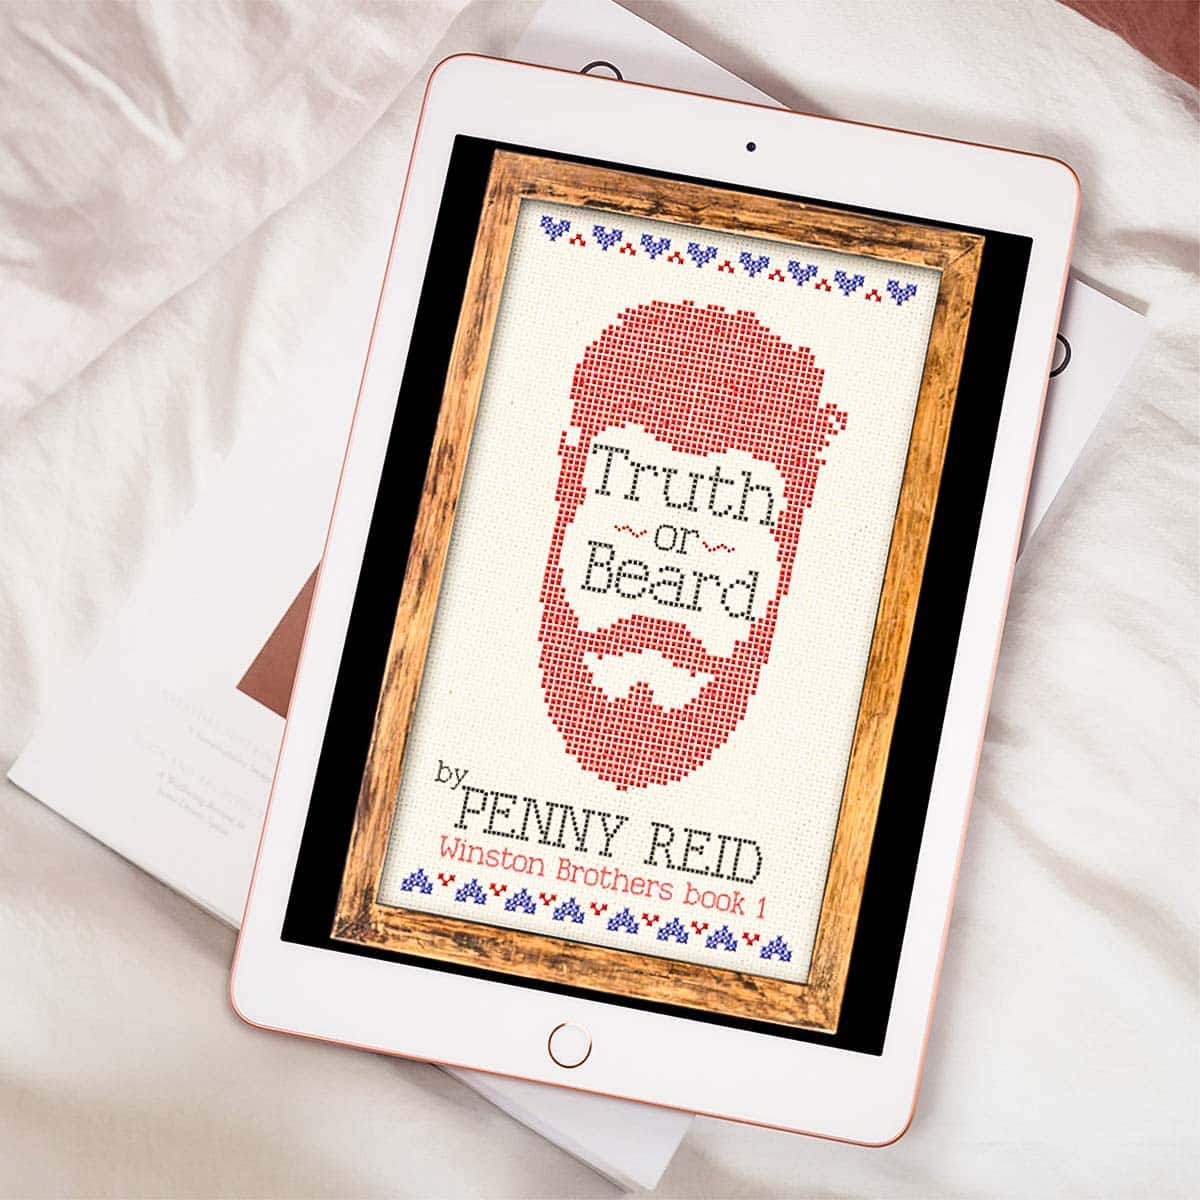 Truth or Beard by Penny Reid is a smart, entertaining, and totally irresistible enemies-to-lovers slow burn romance. It's also a quirky and unique start to the Winston Brothers series!